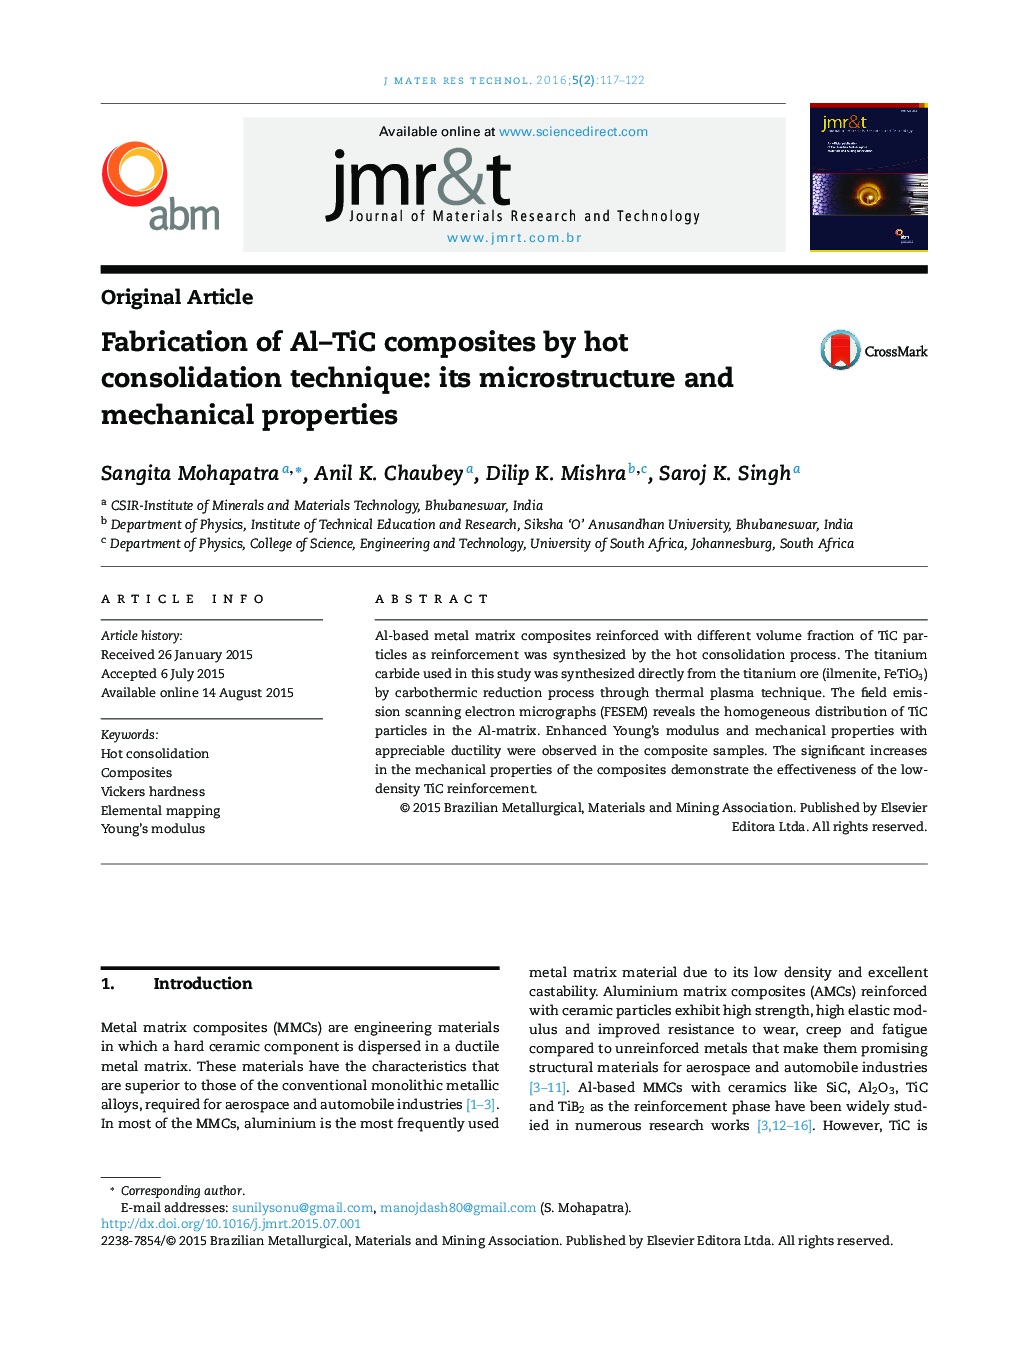 Fabrication of Al–TiC composites by hot consolidation technique: its microstructure and mechanical properties